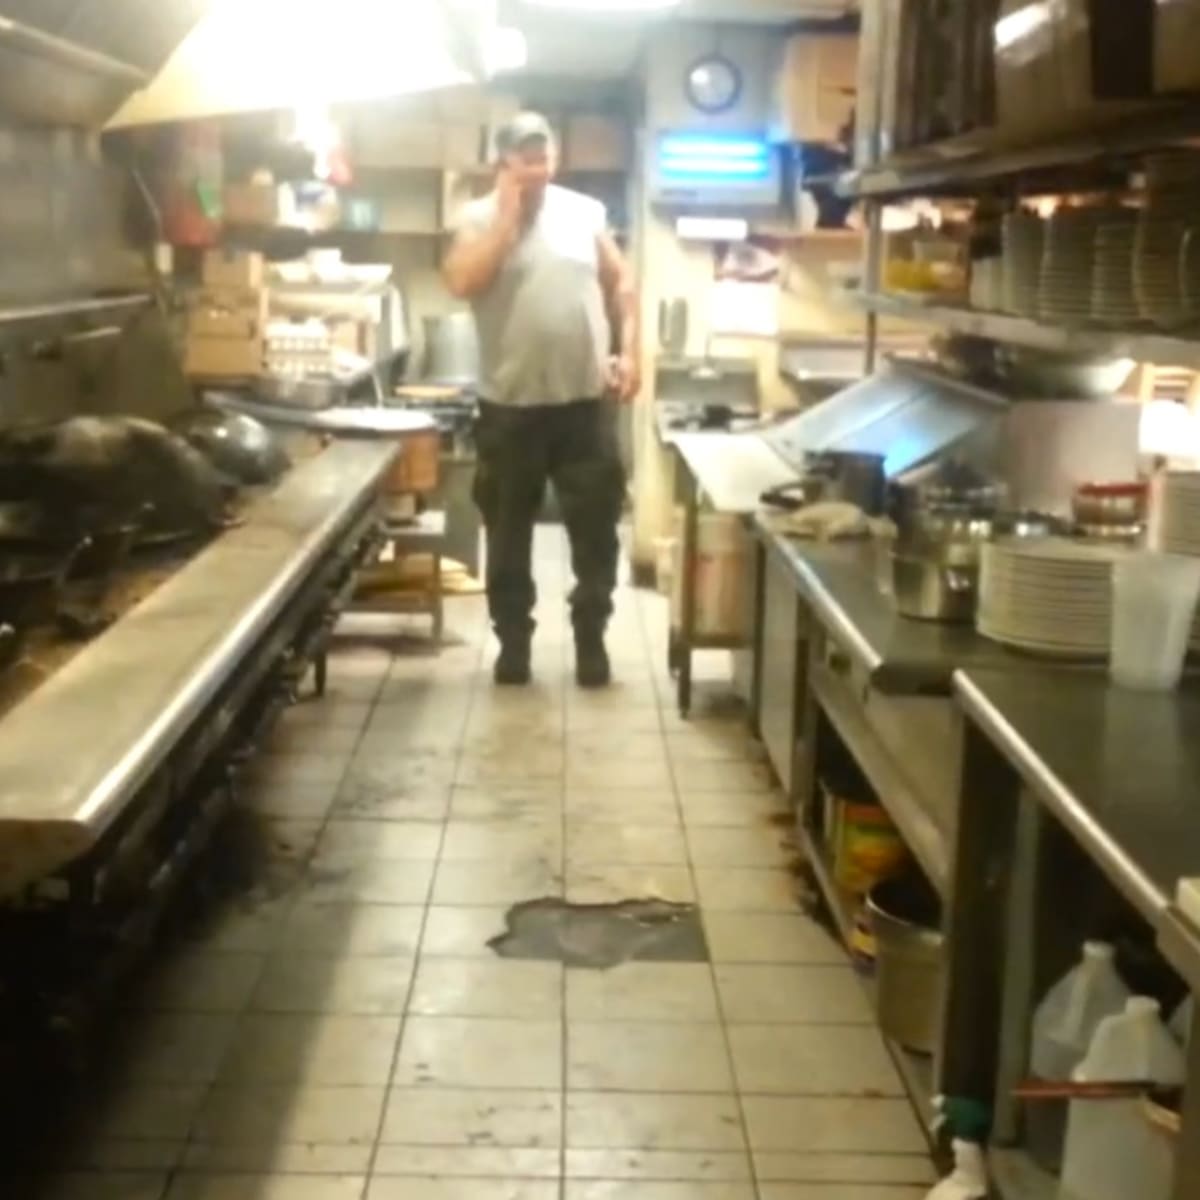 Video Exposing Unsanitary Conditions Of New Hampshire Chinese